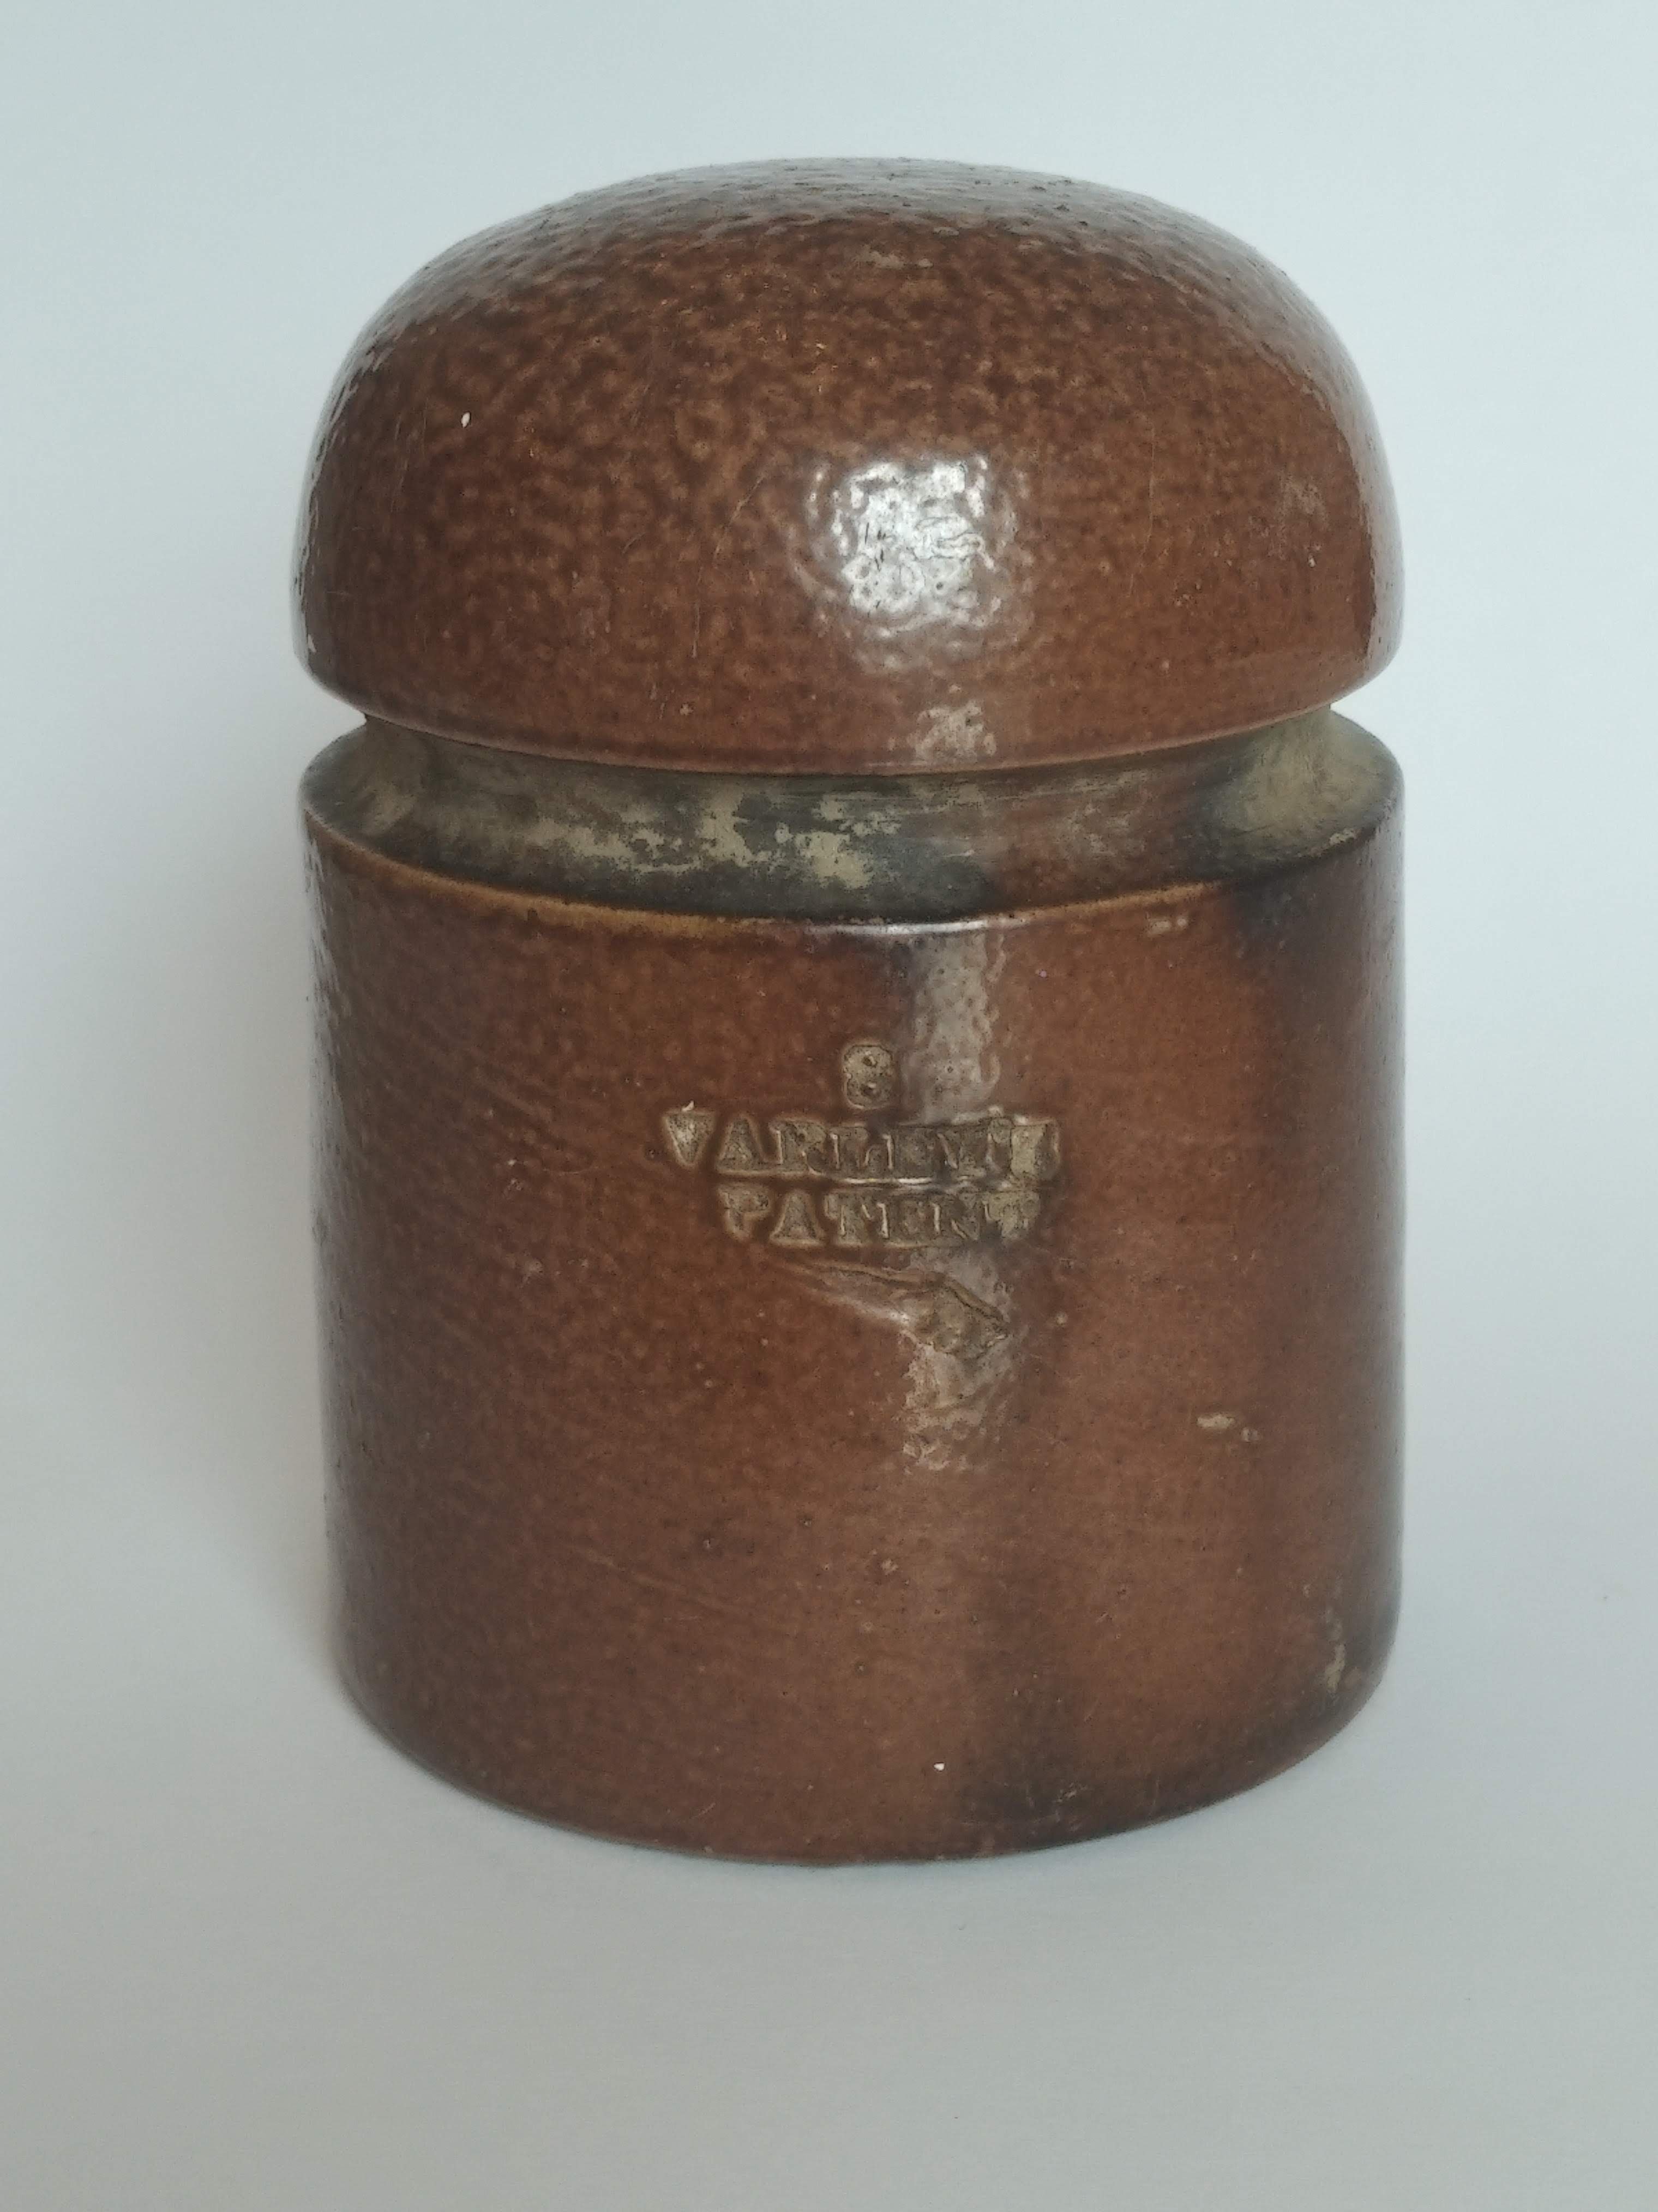 Brown Insulator with round top (Donegal Railway Heritage Center, Heike Thiele CC BY-NC-SA)